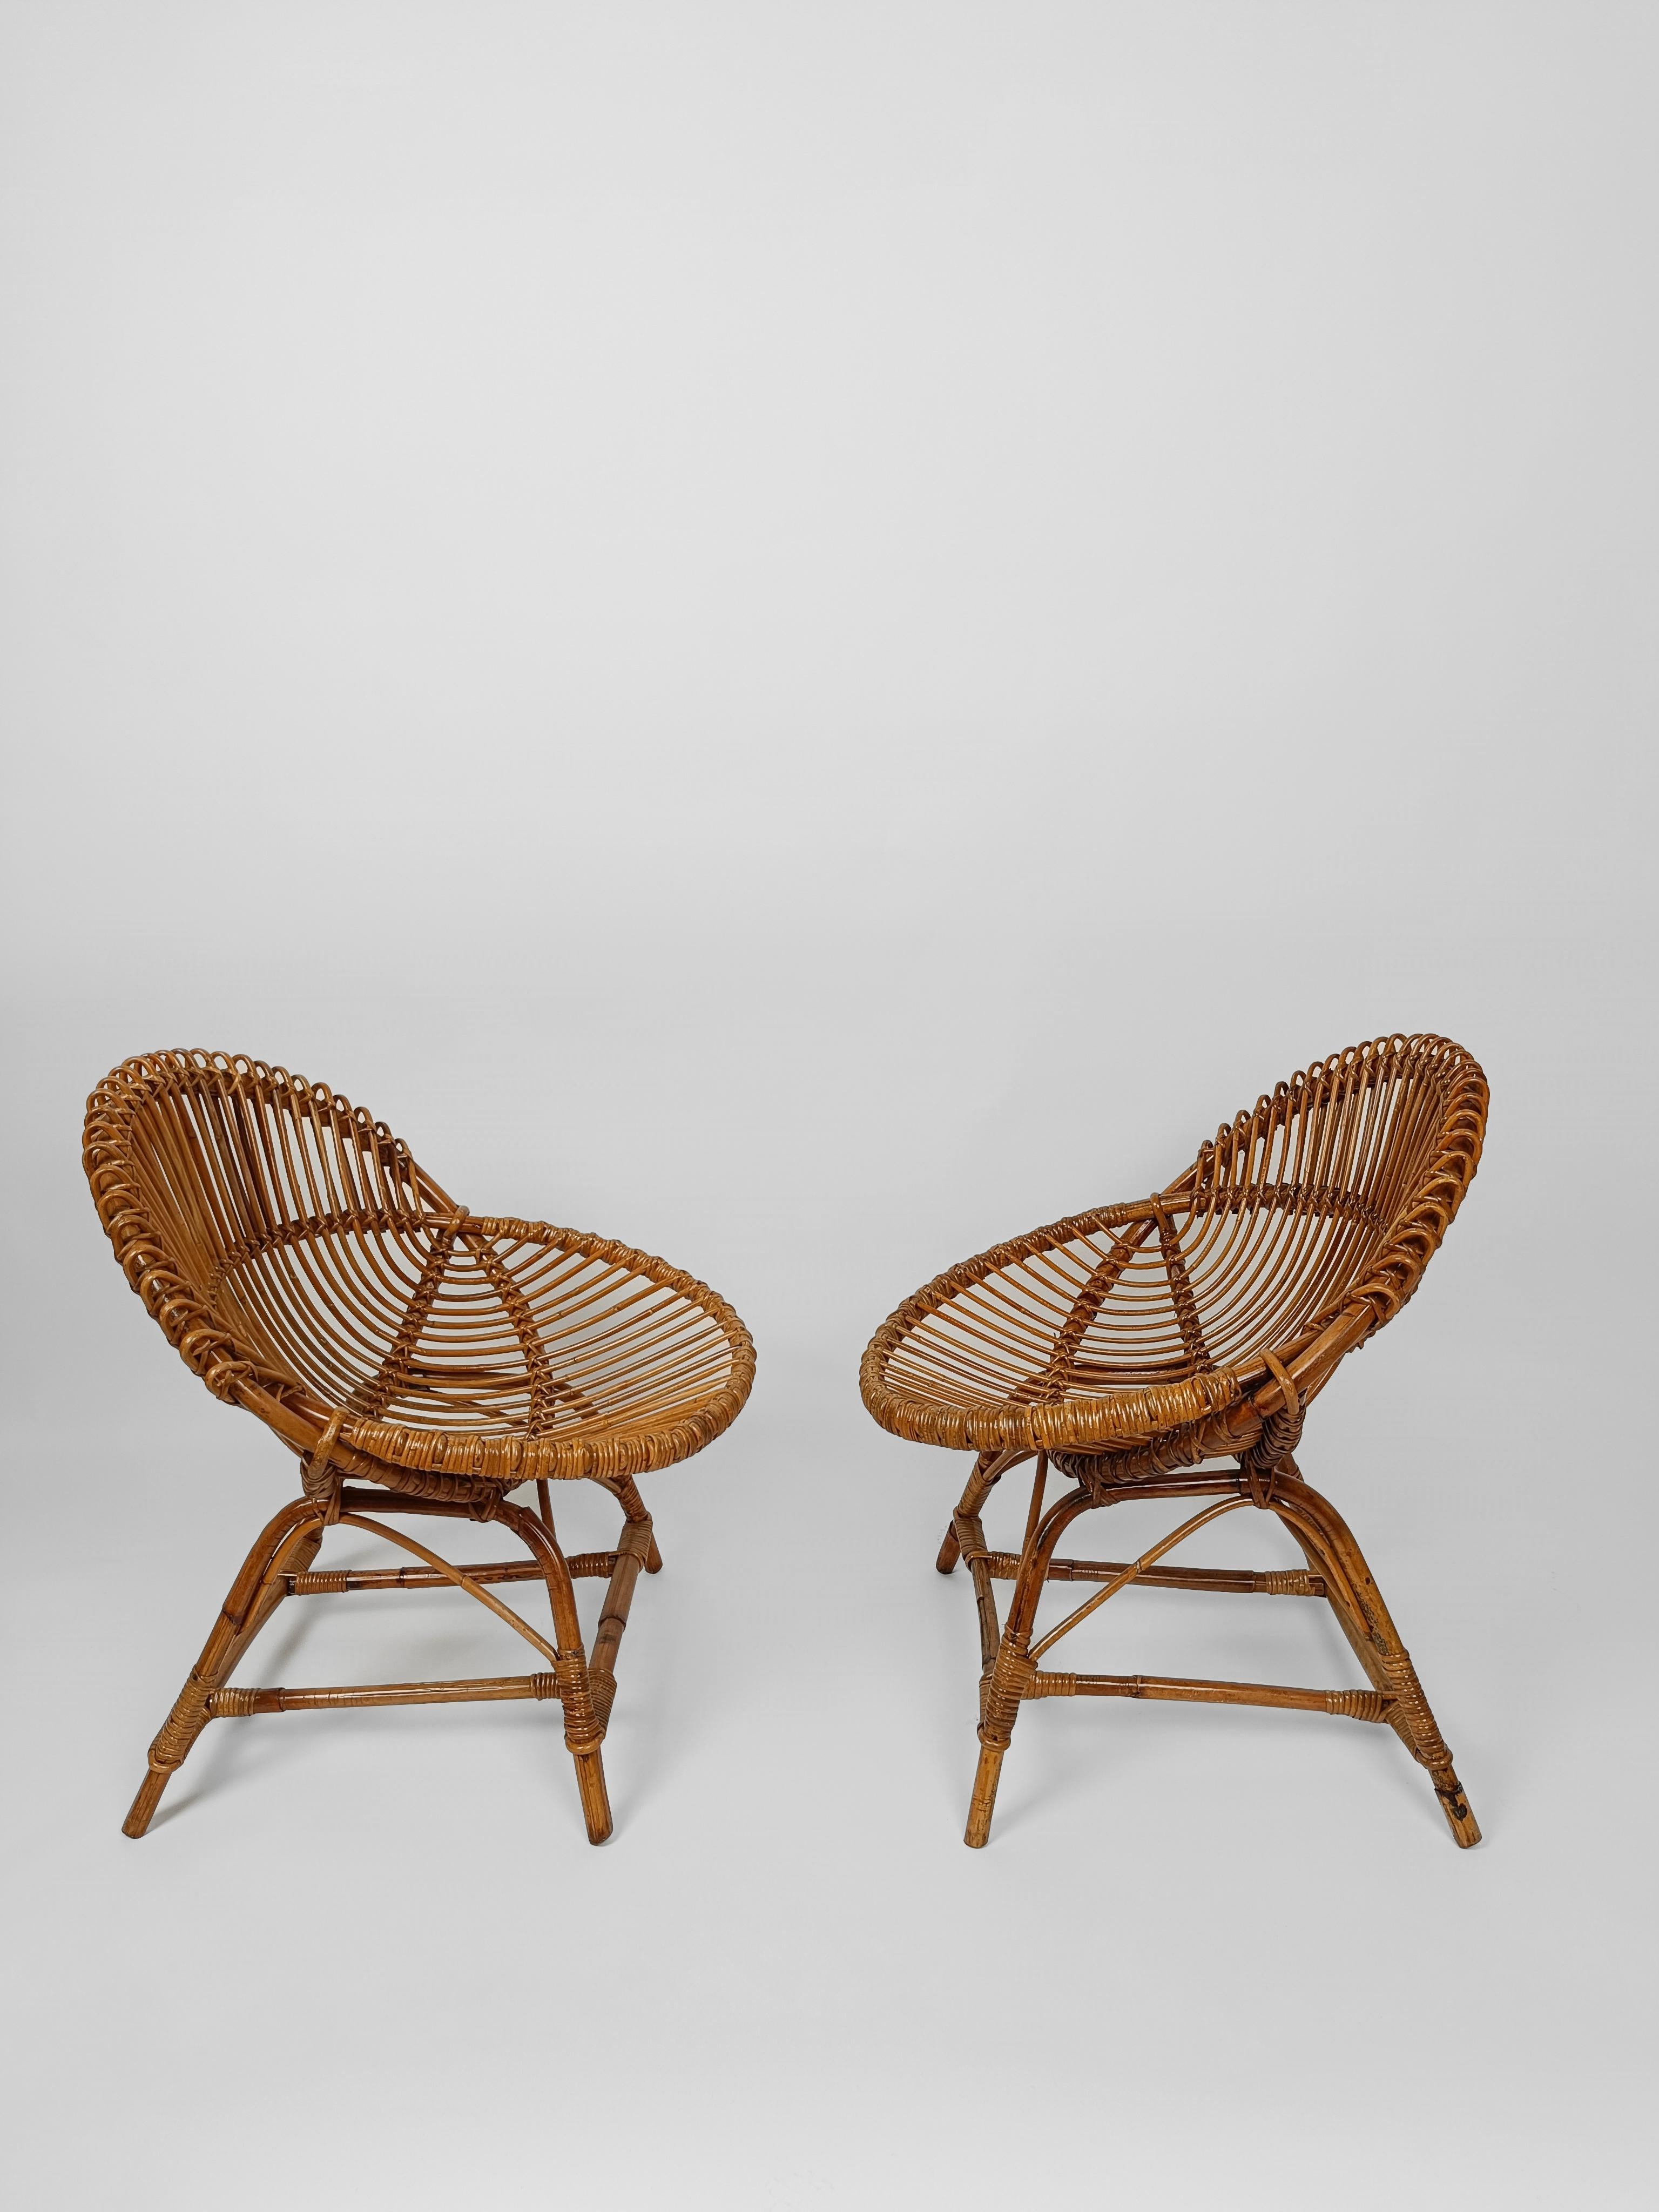 Vintage Cane and Rattan Set of 2 shell-shaped Armchairs with Coffe Table, 1960s For Sale 1